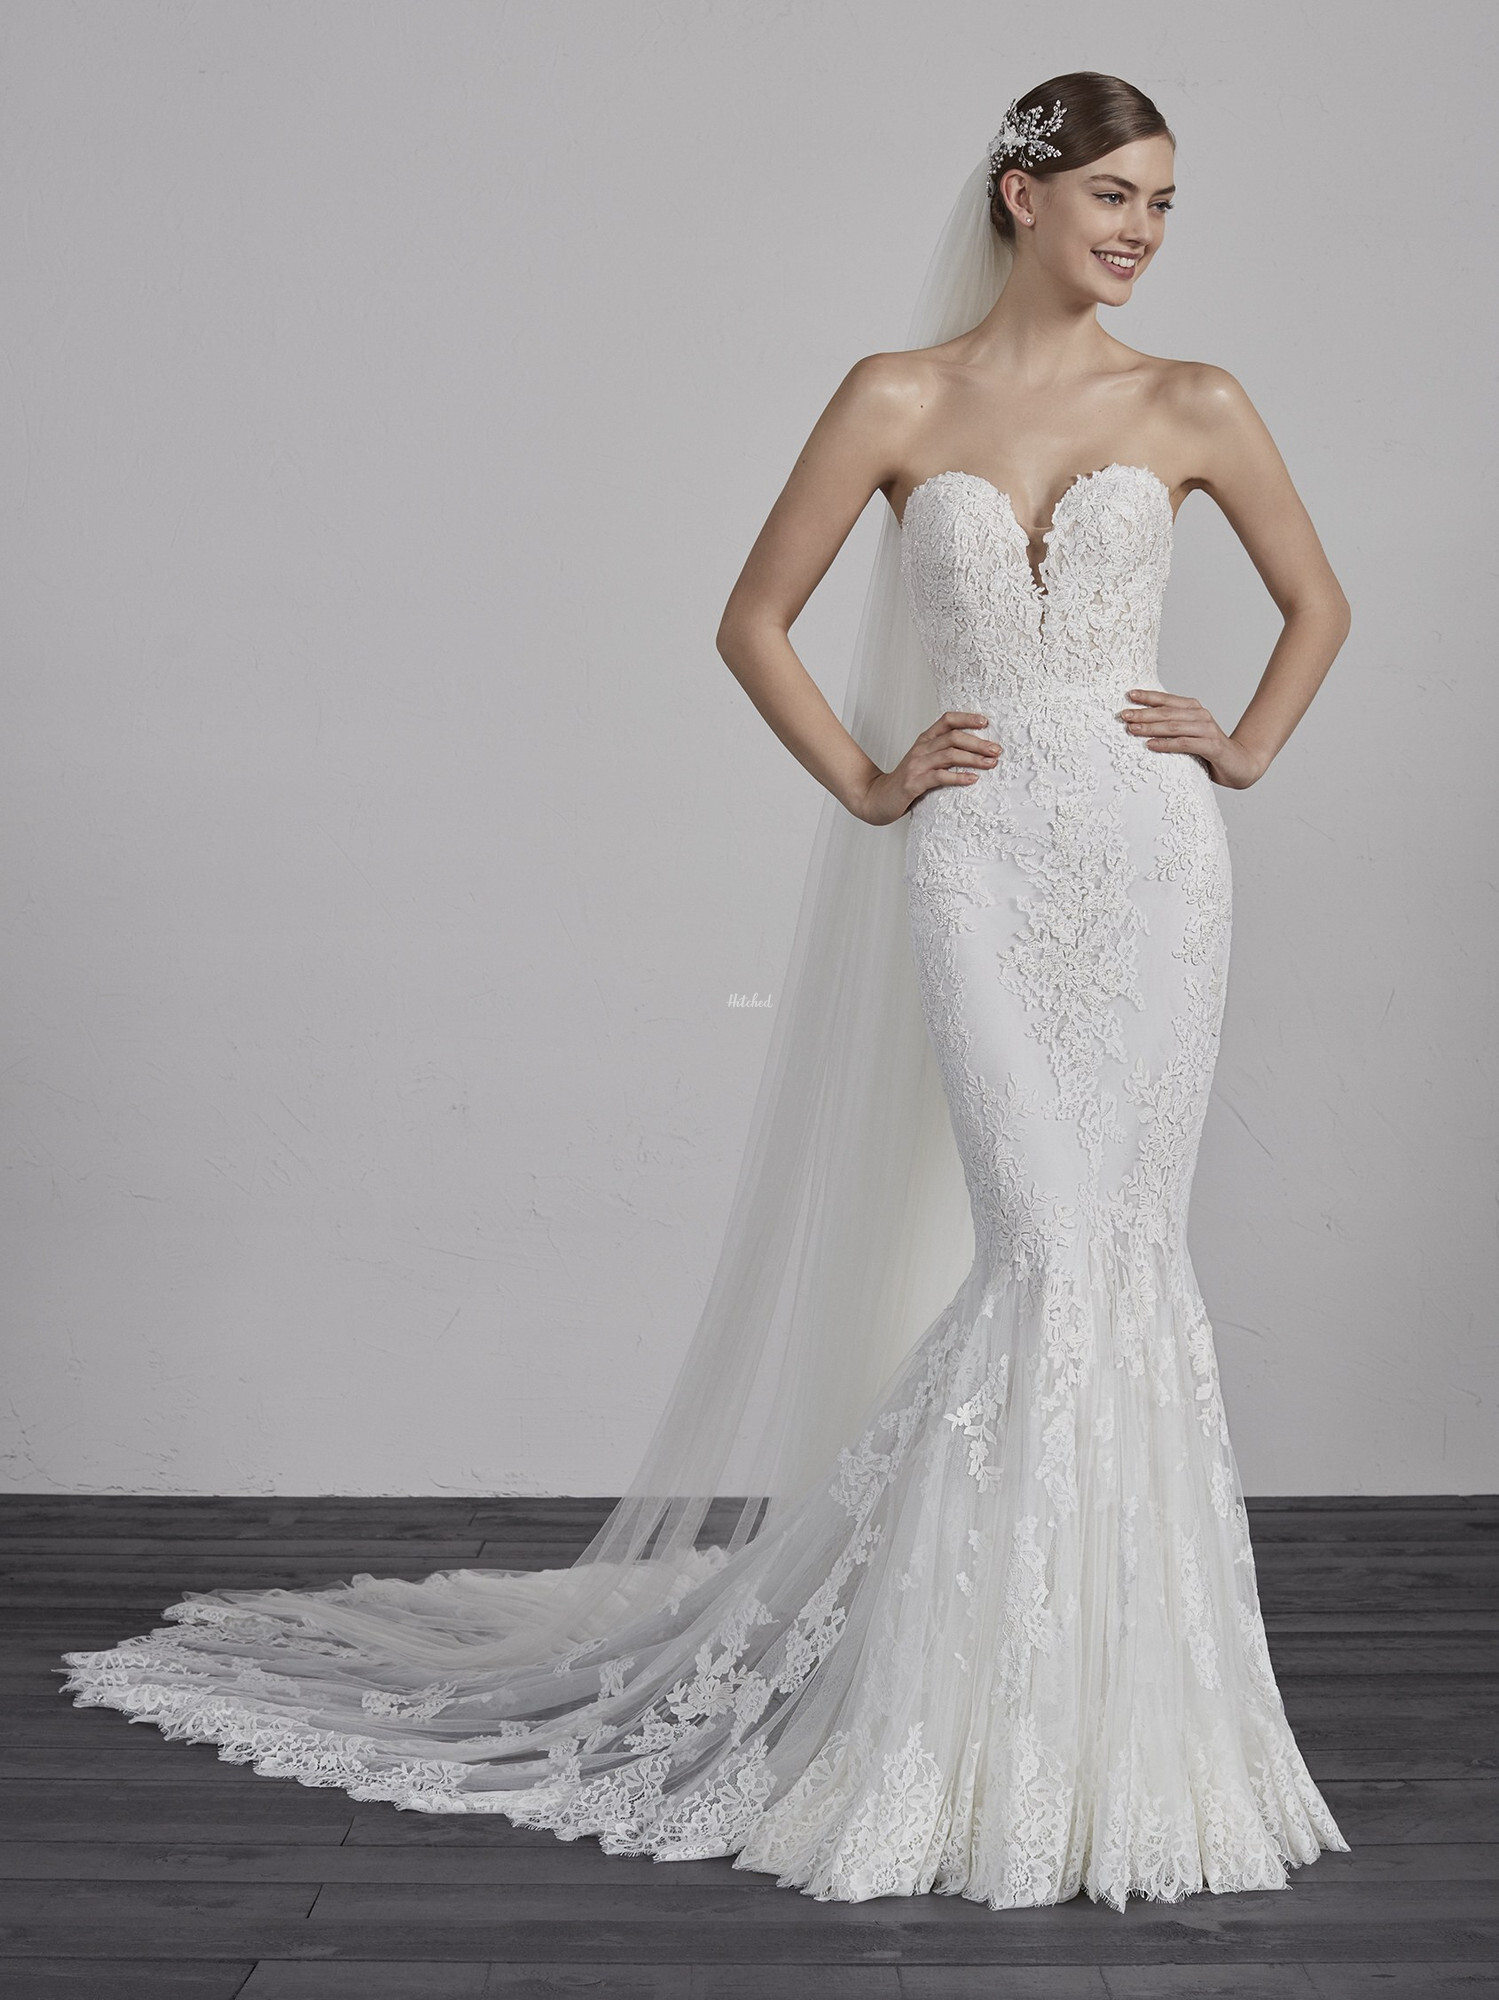 ERMIN Wedding Dress from Pronovias - hitched.co.uk